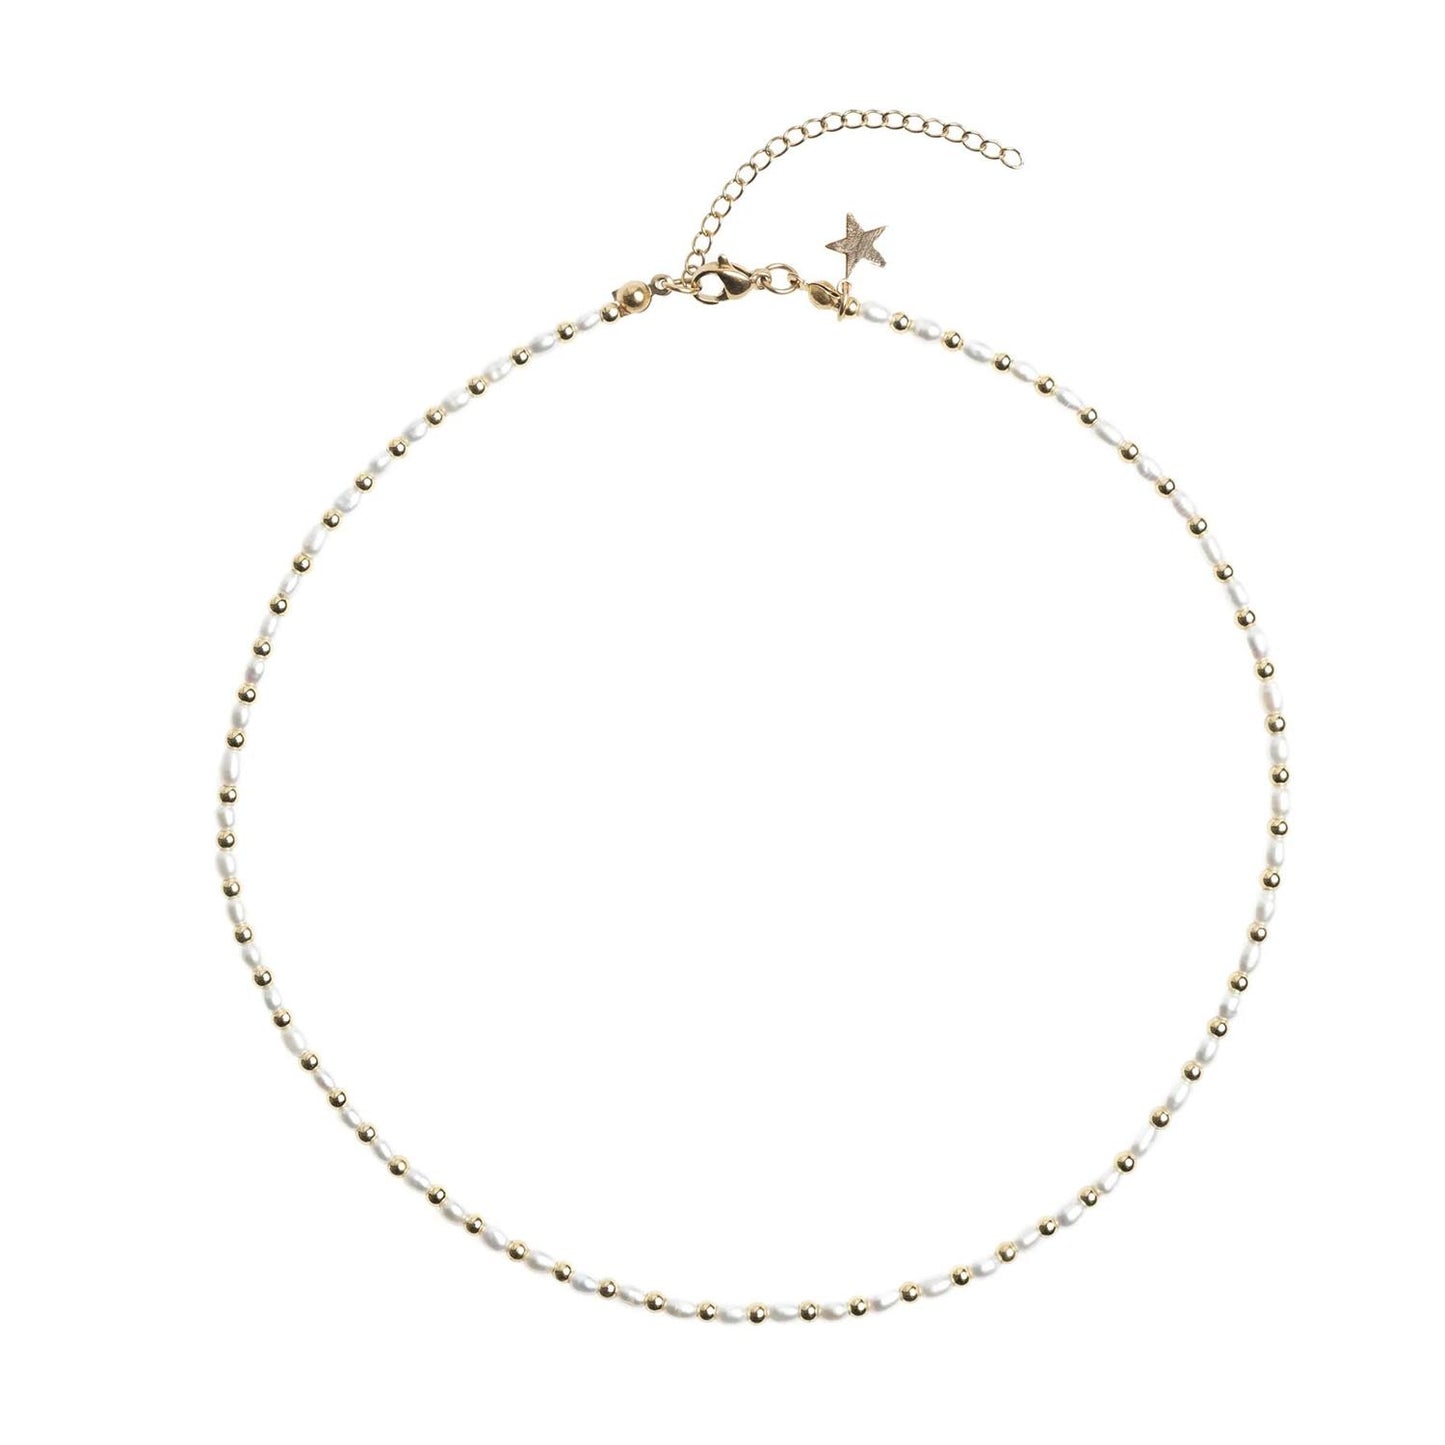 Oval Pearl Necklace W/Gold Beads 40 cm White Pearl